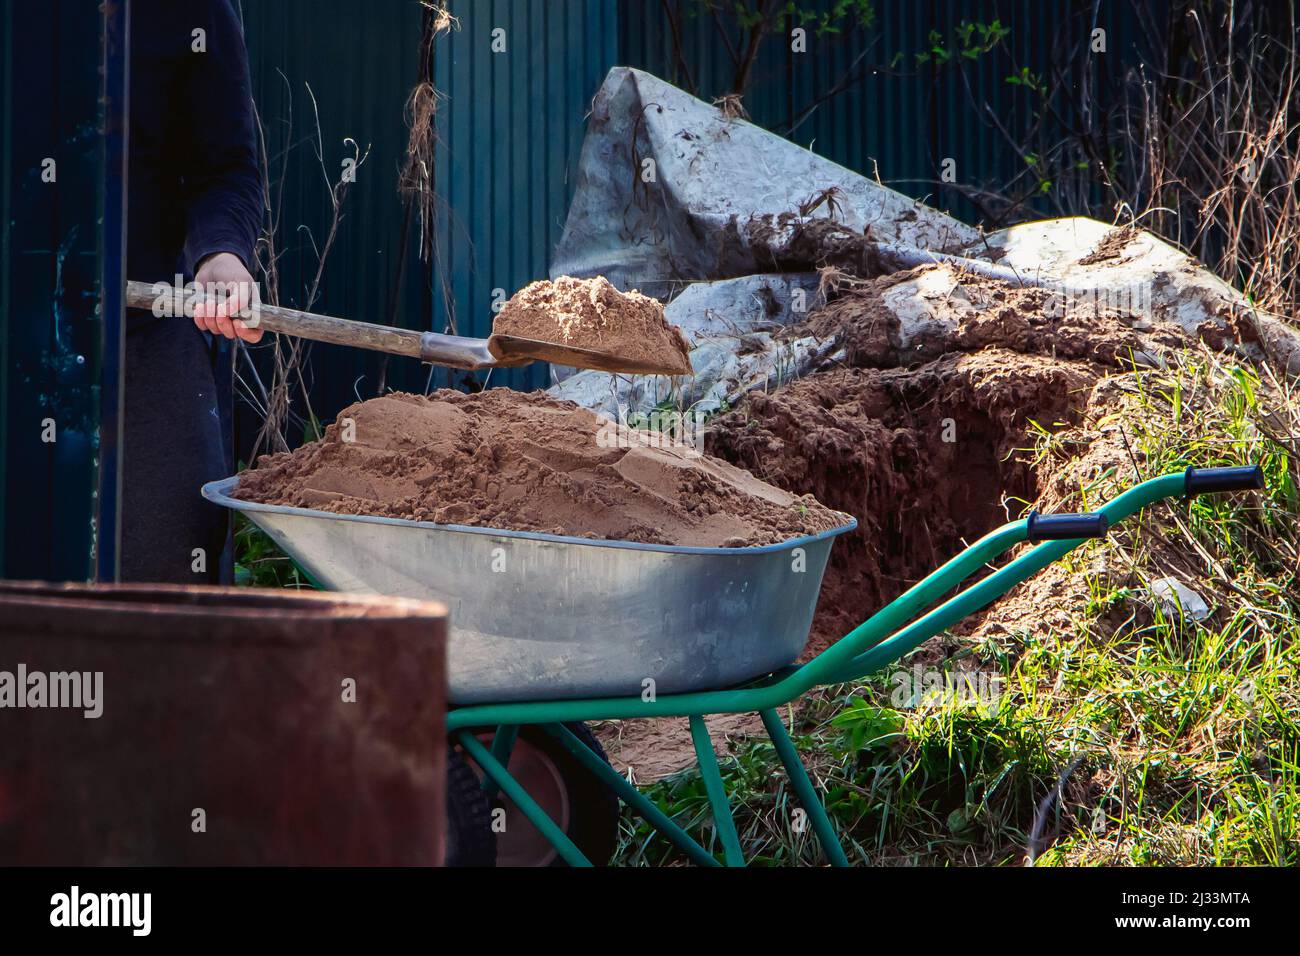 Man uses shovel and fills wheelbarrow with sand. Construction works close-up. Rural life in countryside. Stock Photo